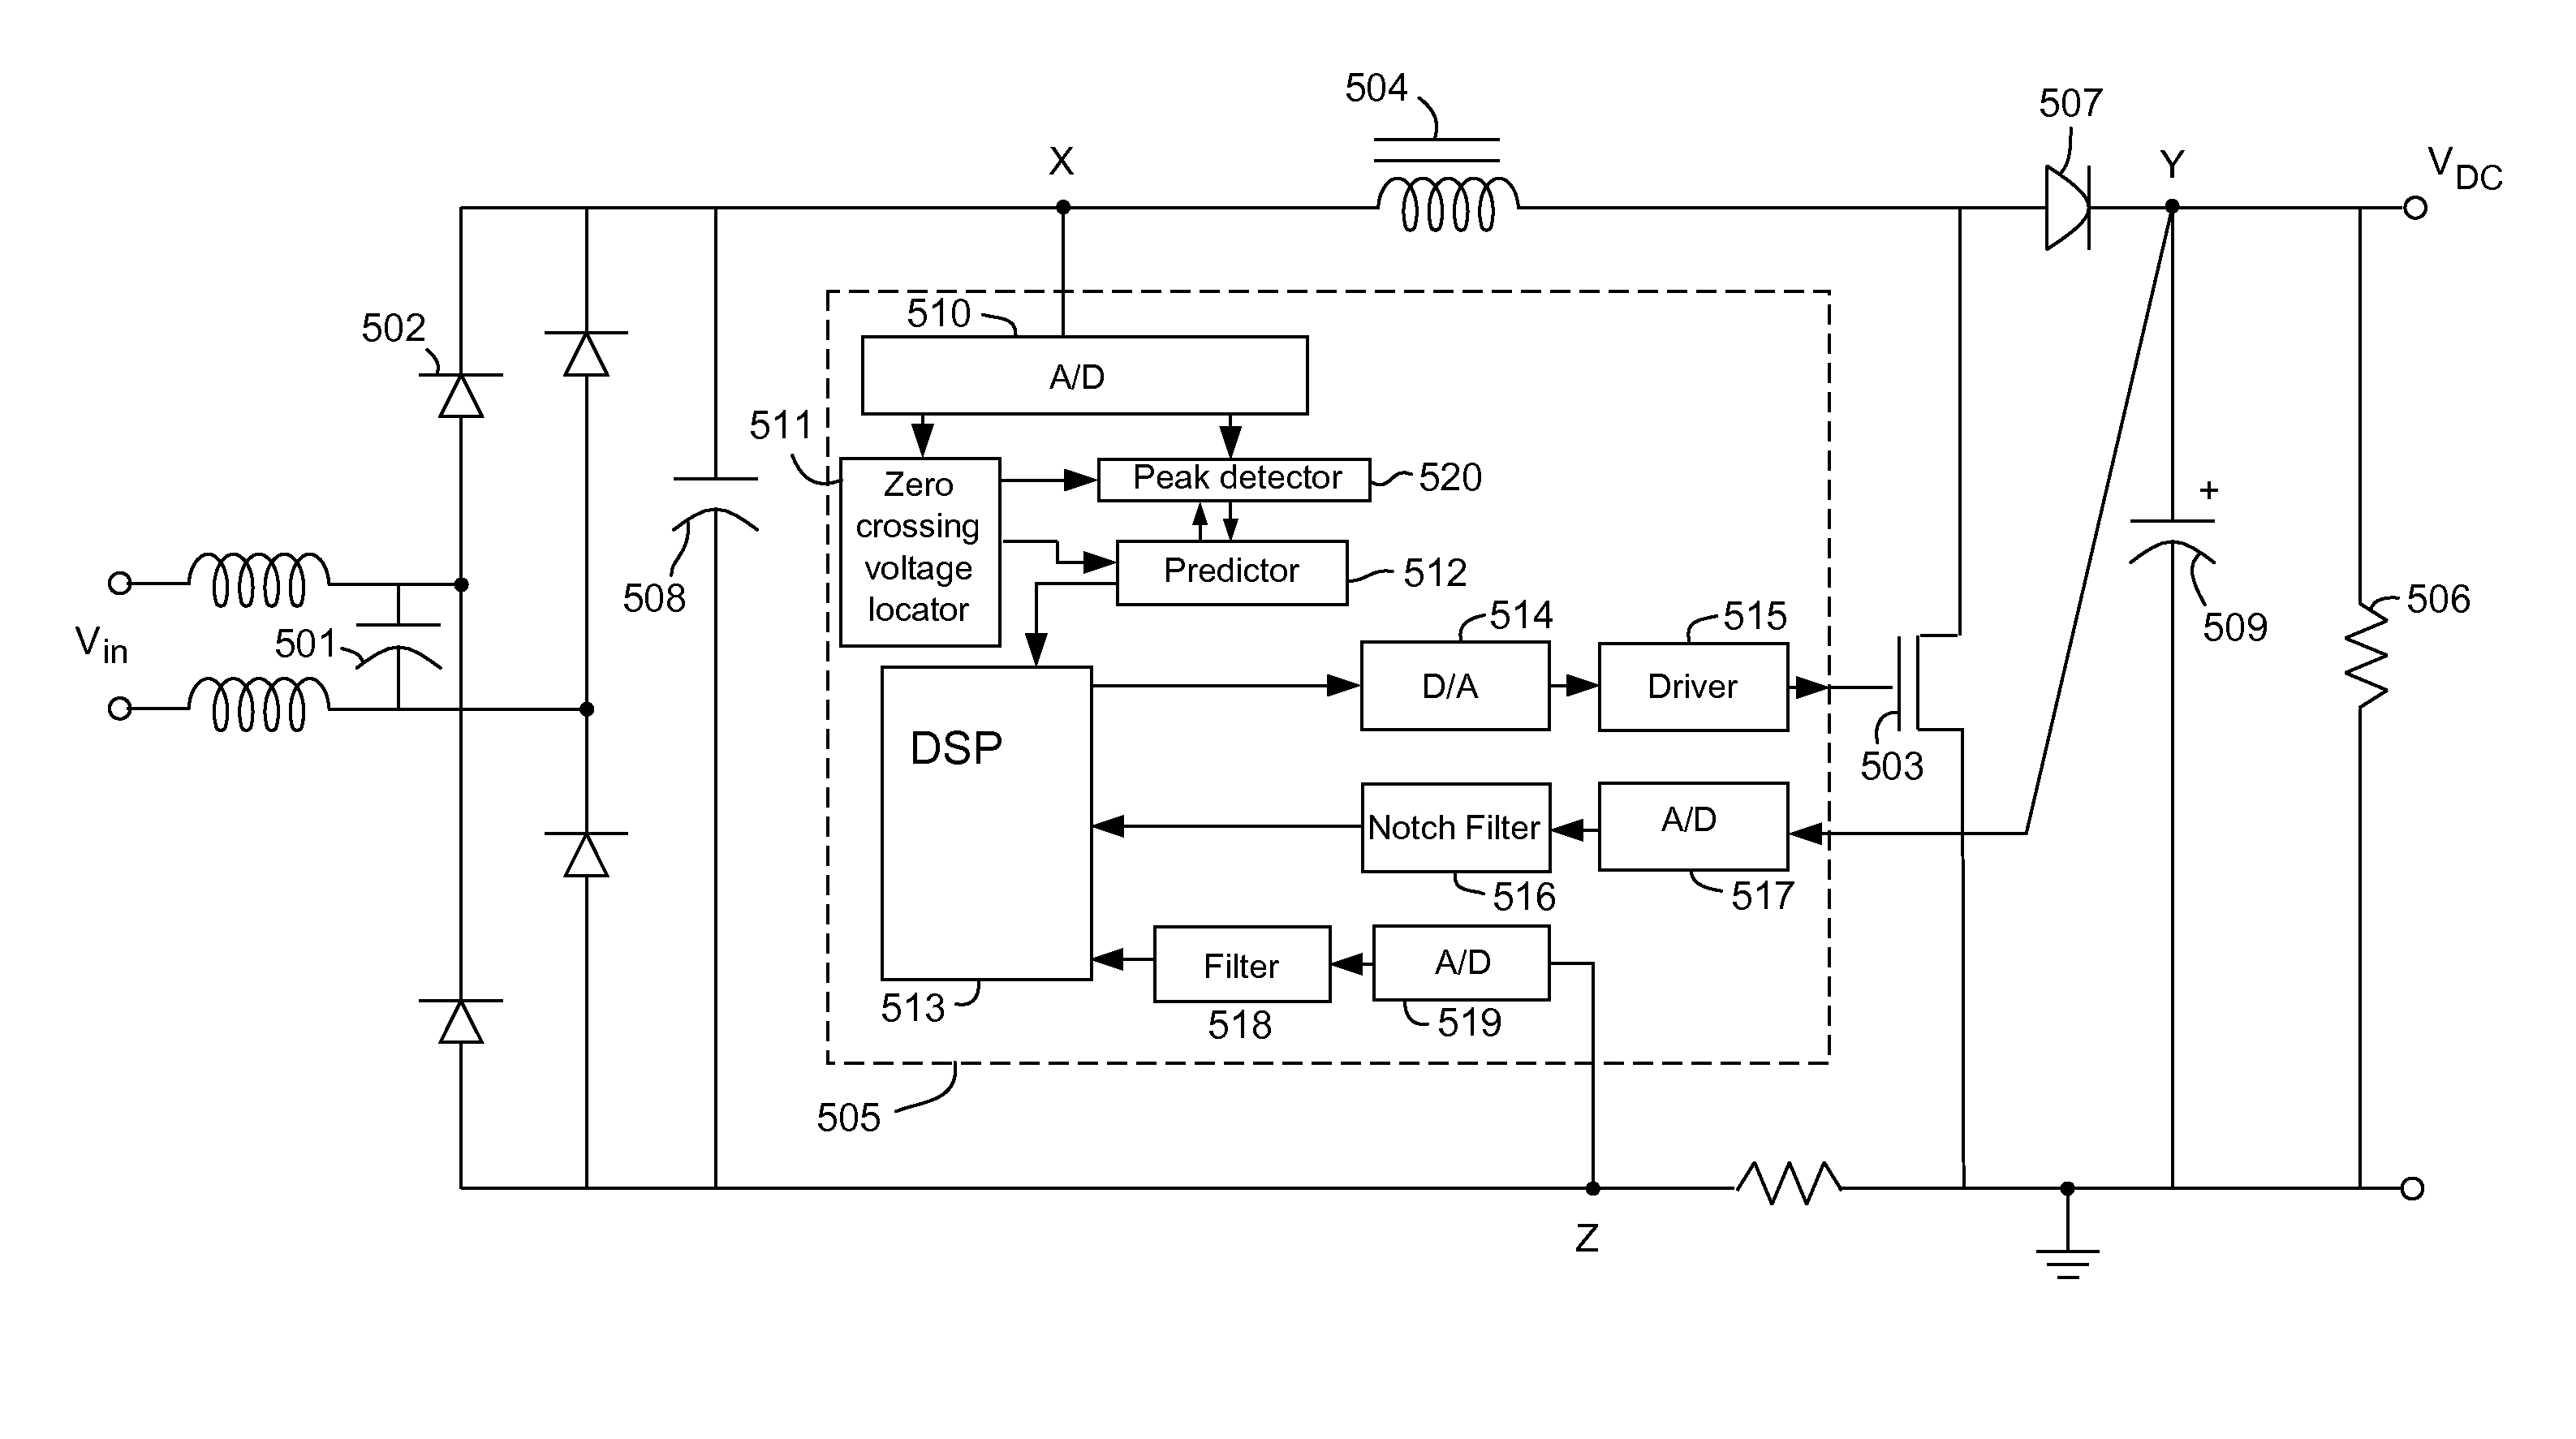 Power factor correction boost converter with continuous, discontinuous, or critical mode selection